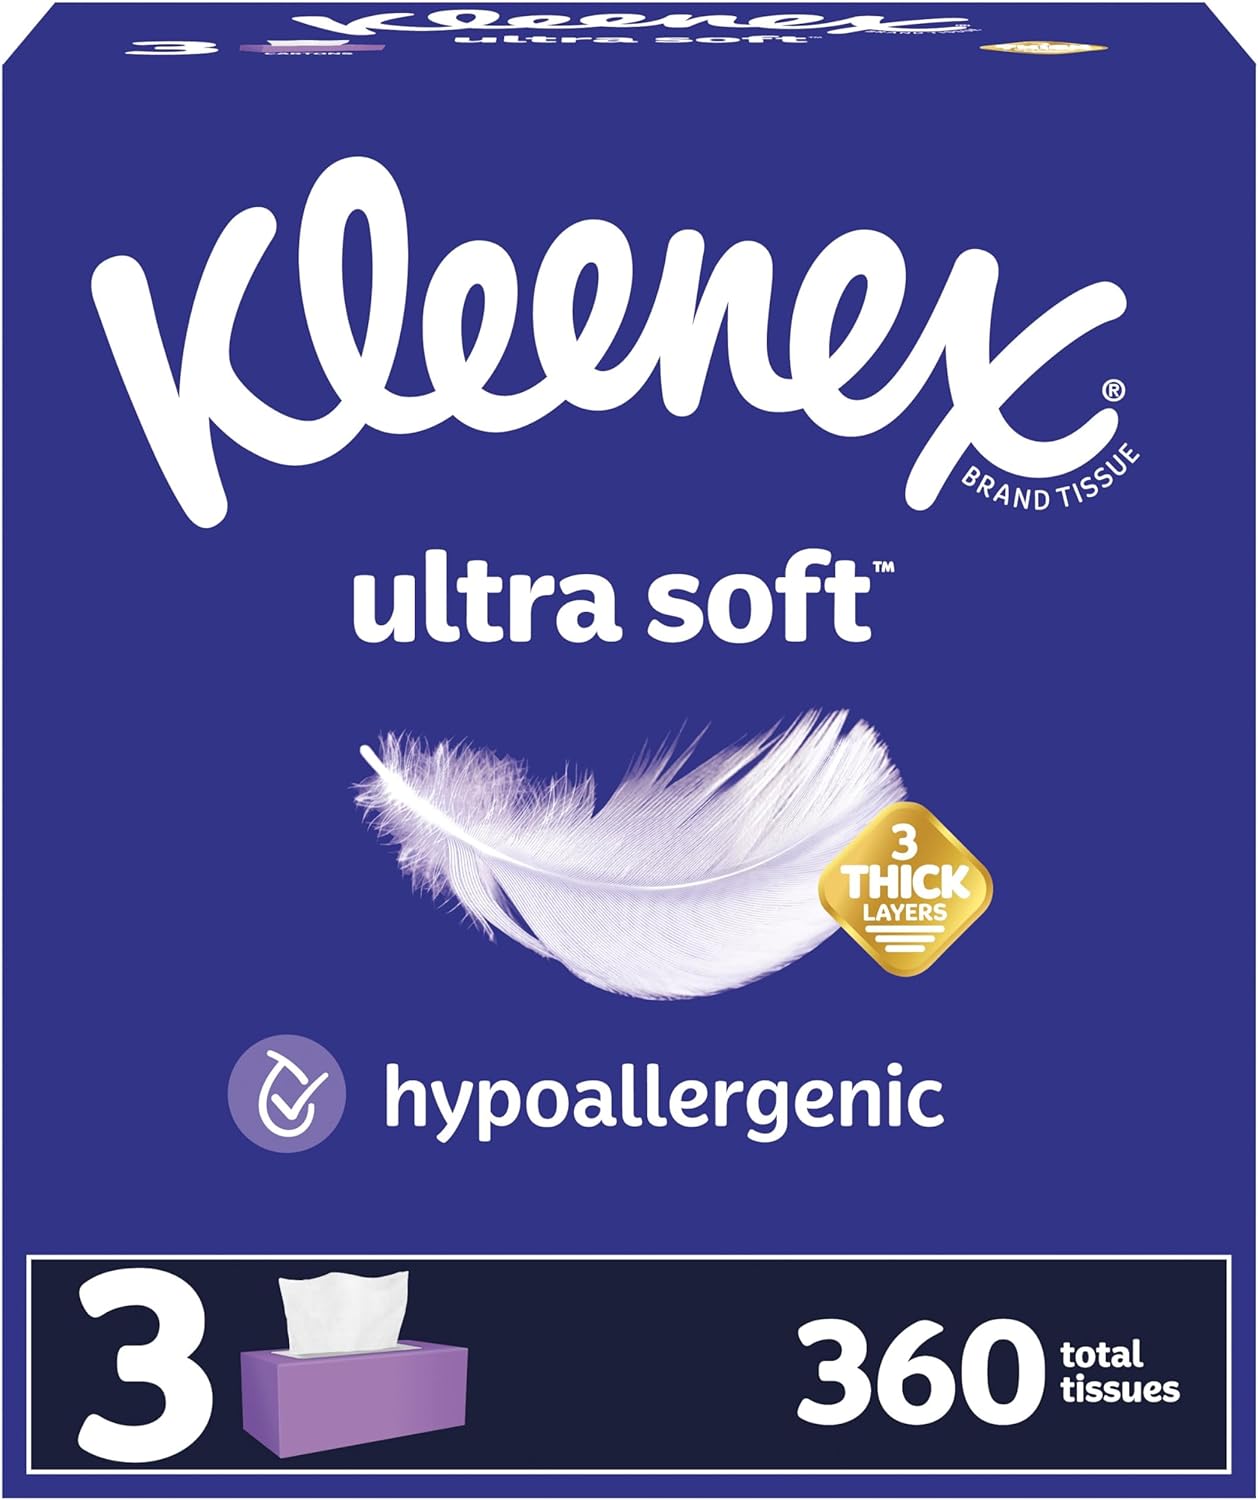 Kleenex Ultra Soft Facial Tissues, 3 Flat Boxes, 120 Tissues per Box, 3-Ply (360 Total Tissues), Packaging May Vary - $3.99